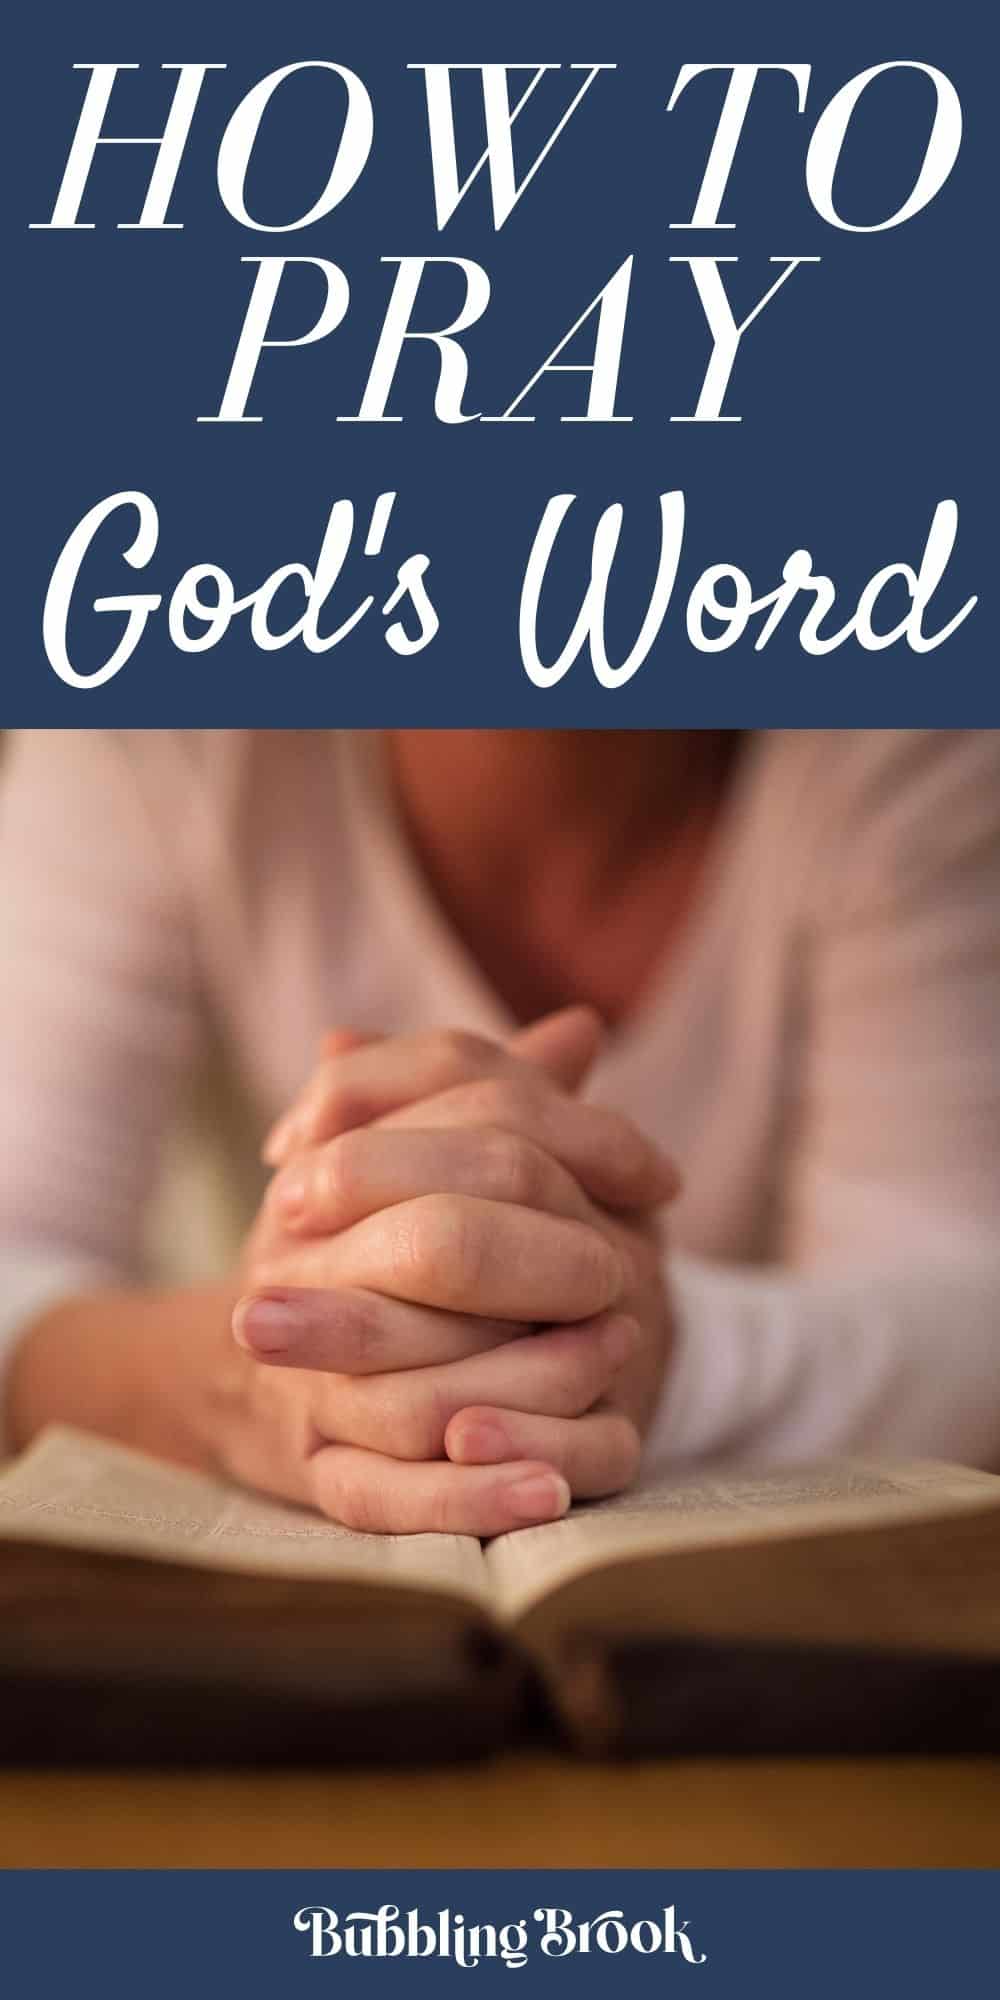 How to pray God's Word